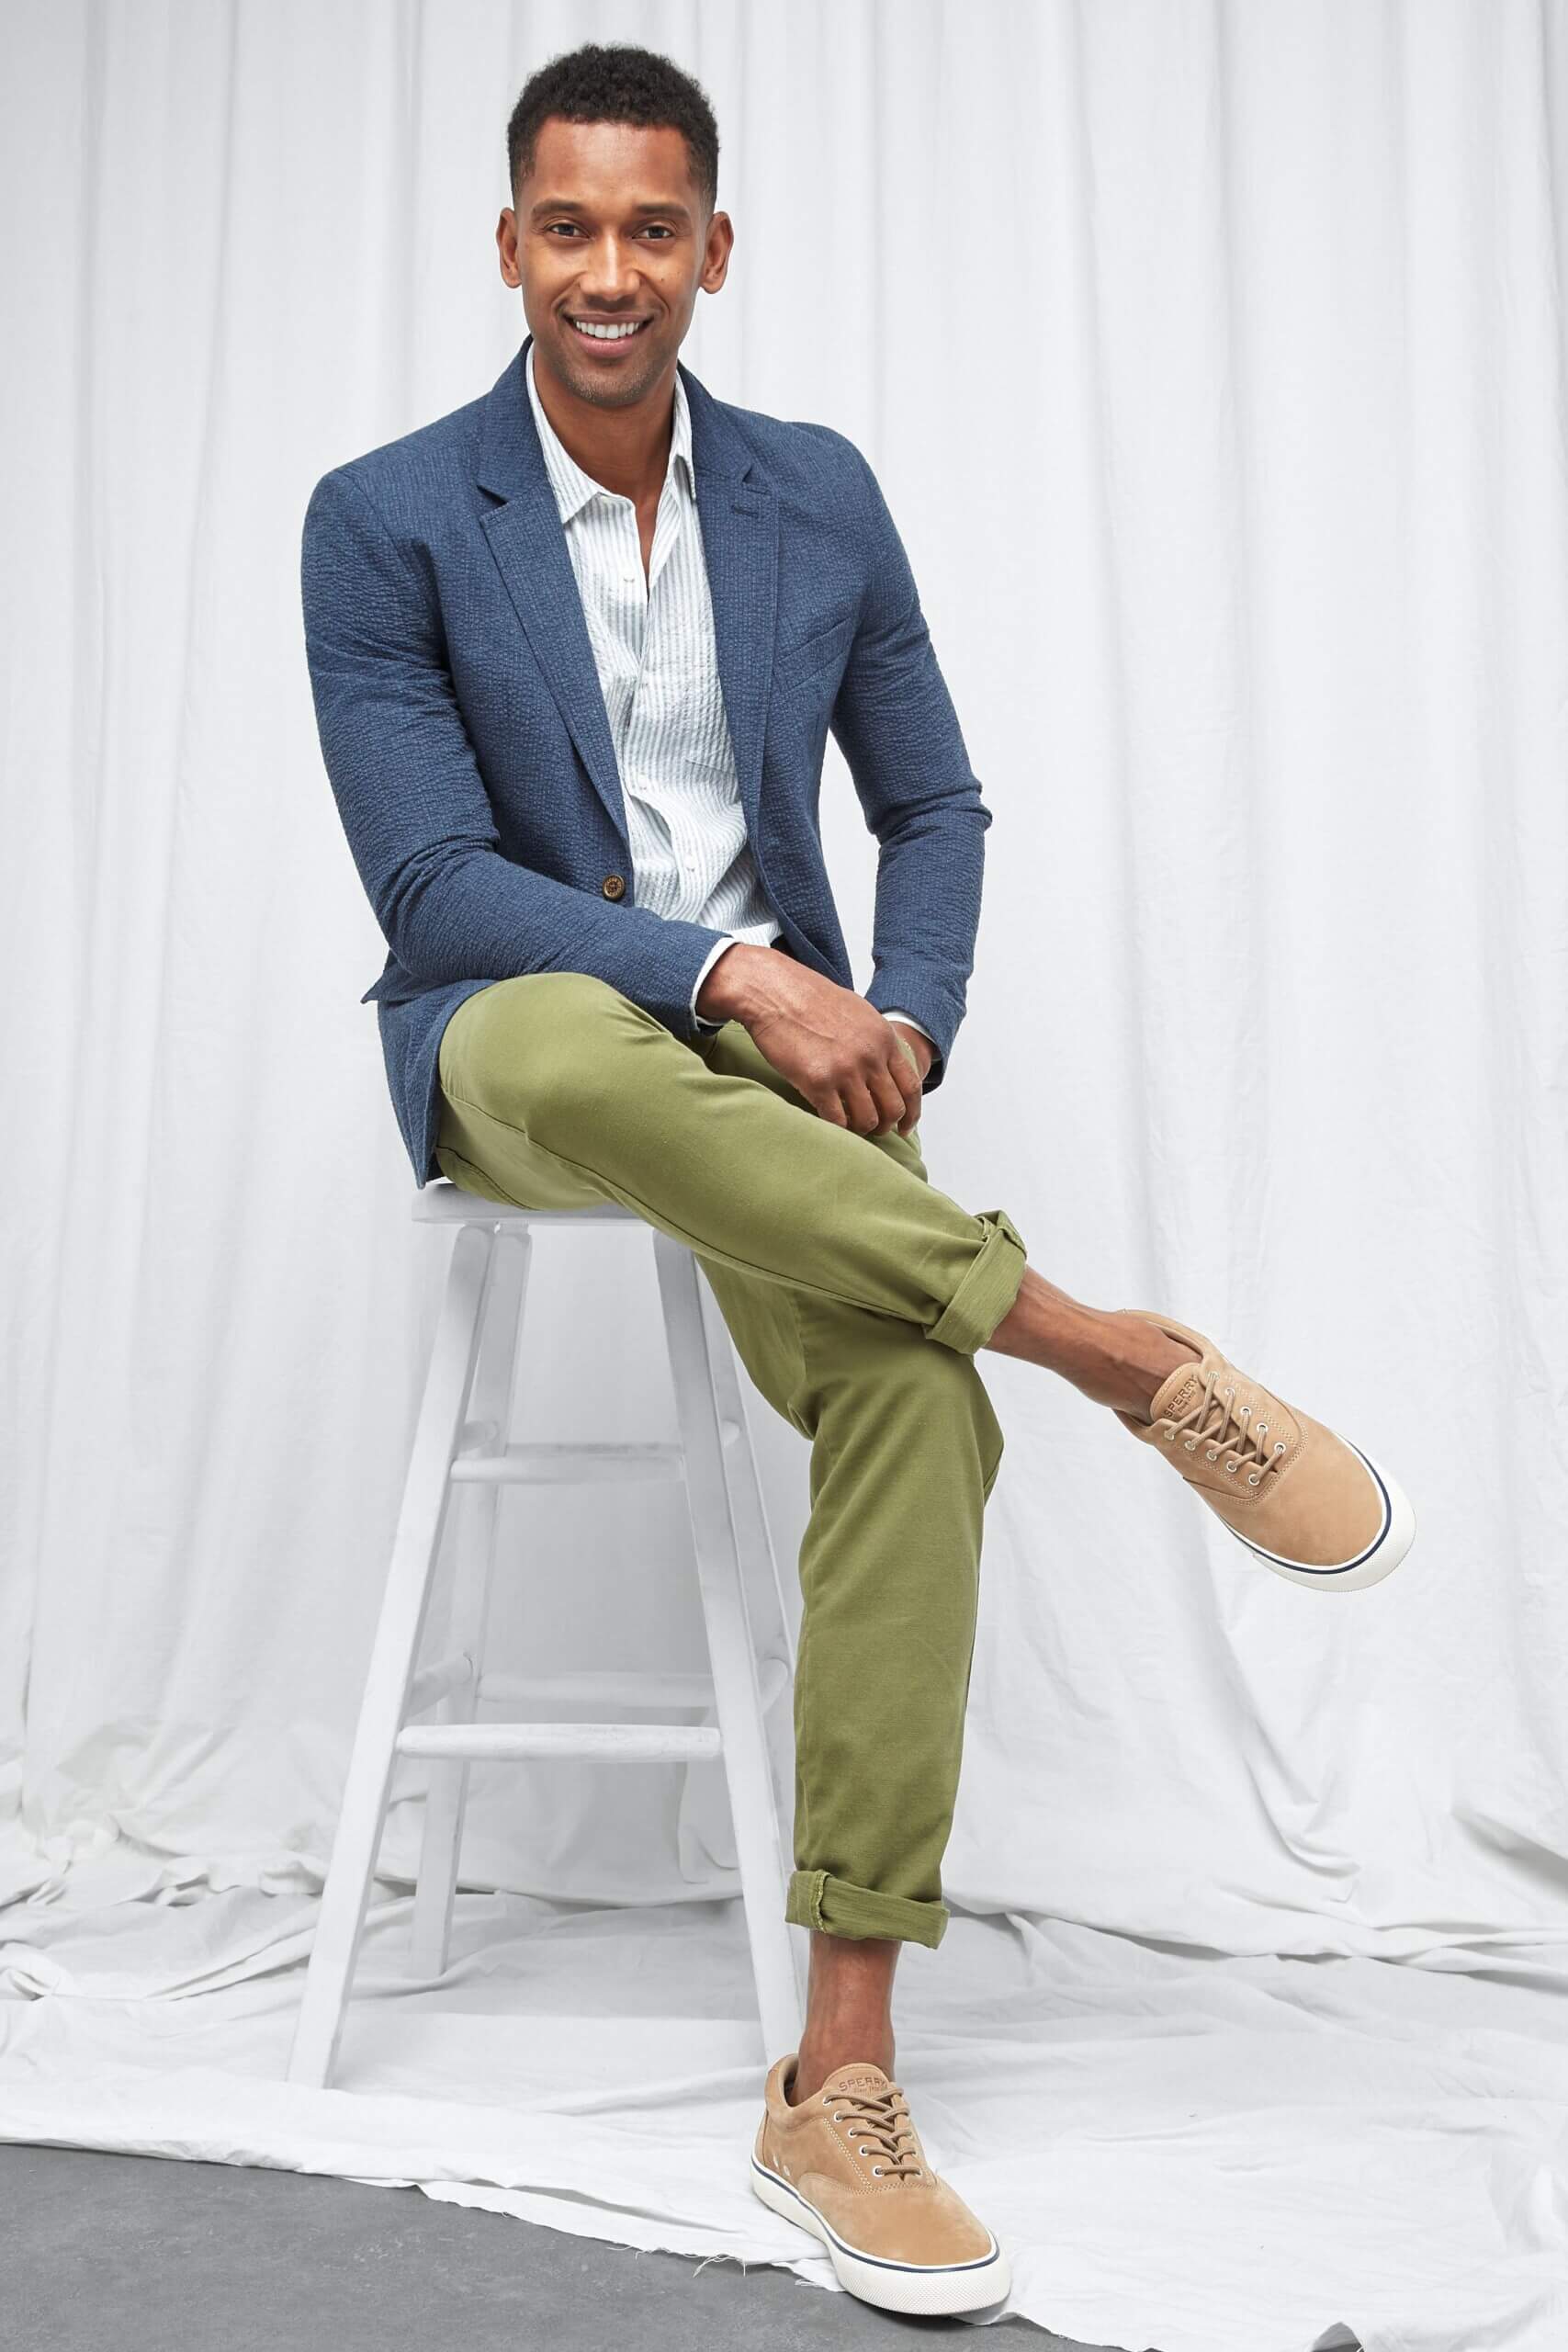 Stitch Fix men's spring wedding guest attire on model wearing green pants, white button-down shirt, blue blazer and tan shoes.